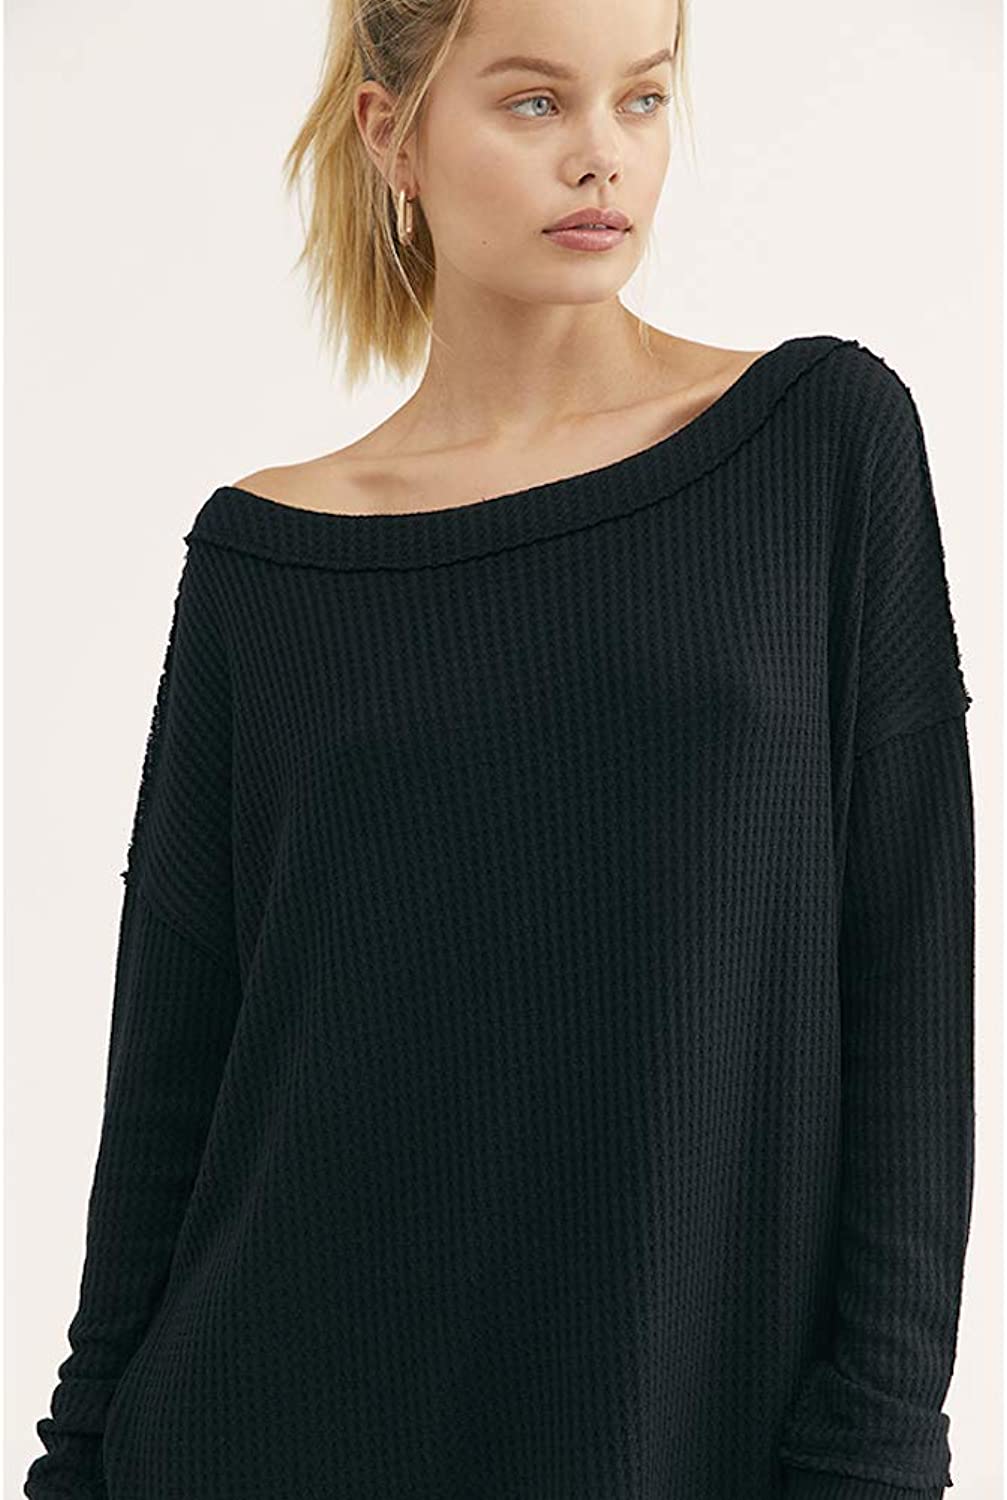 Free People Womens North Shore Thermal Knit Tee